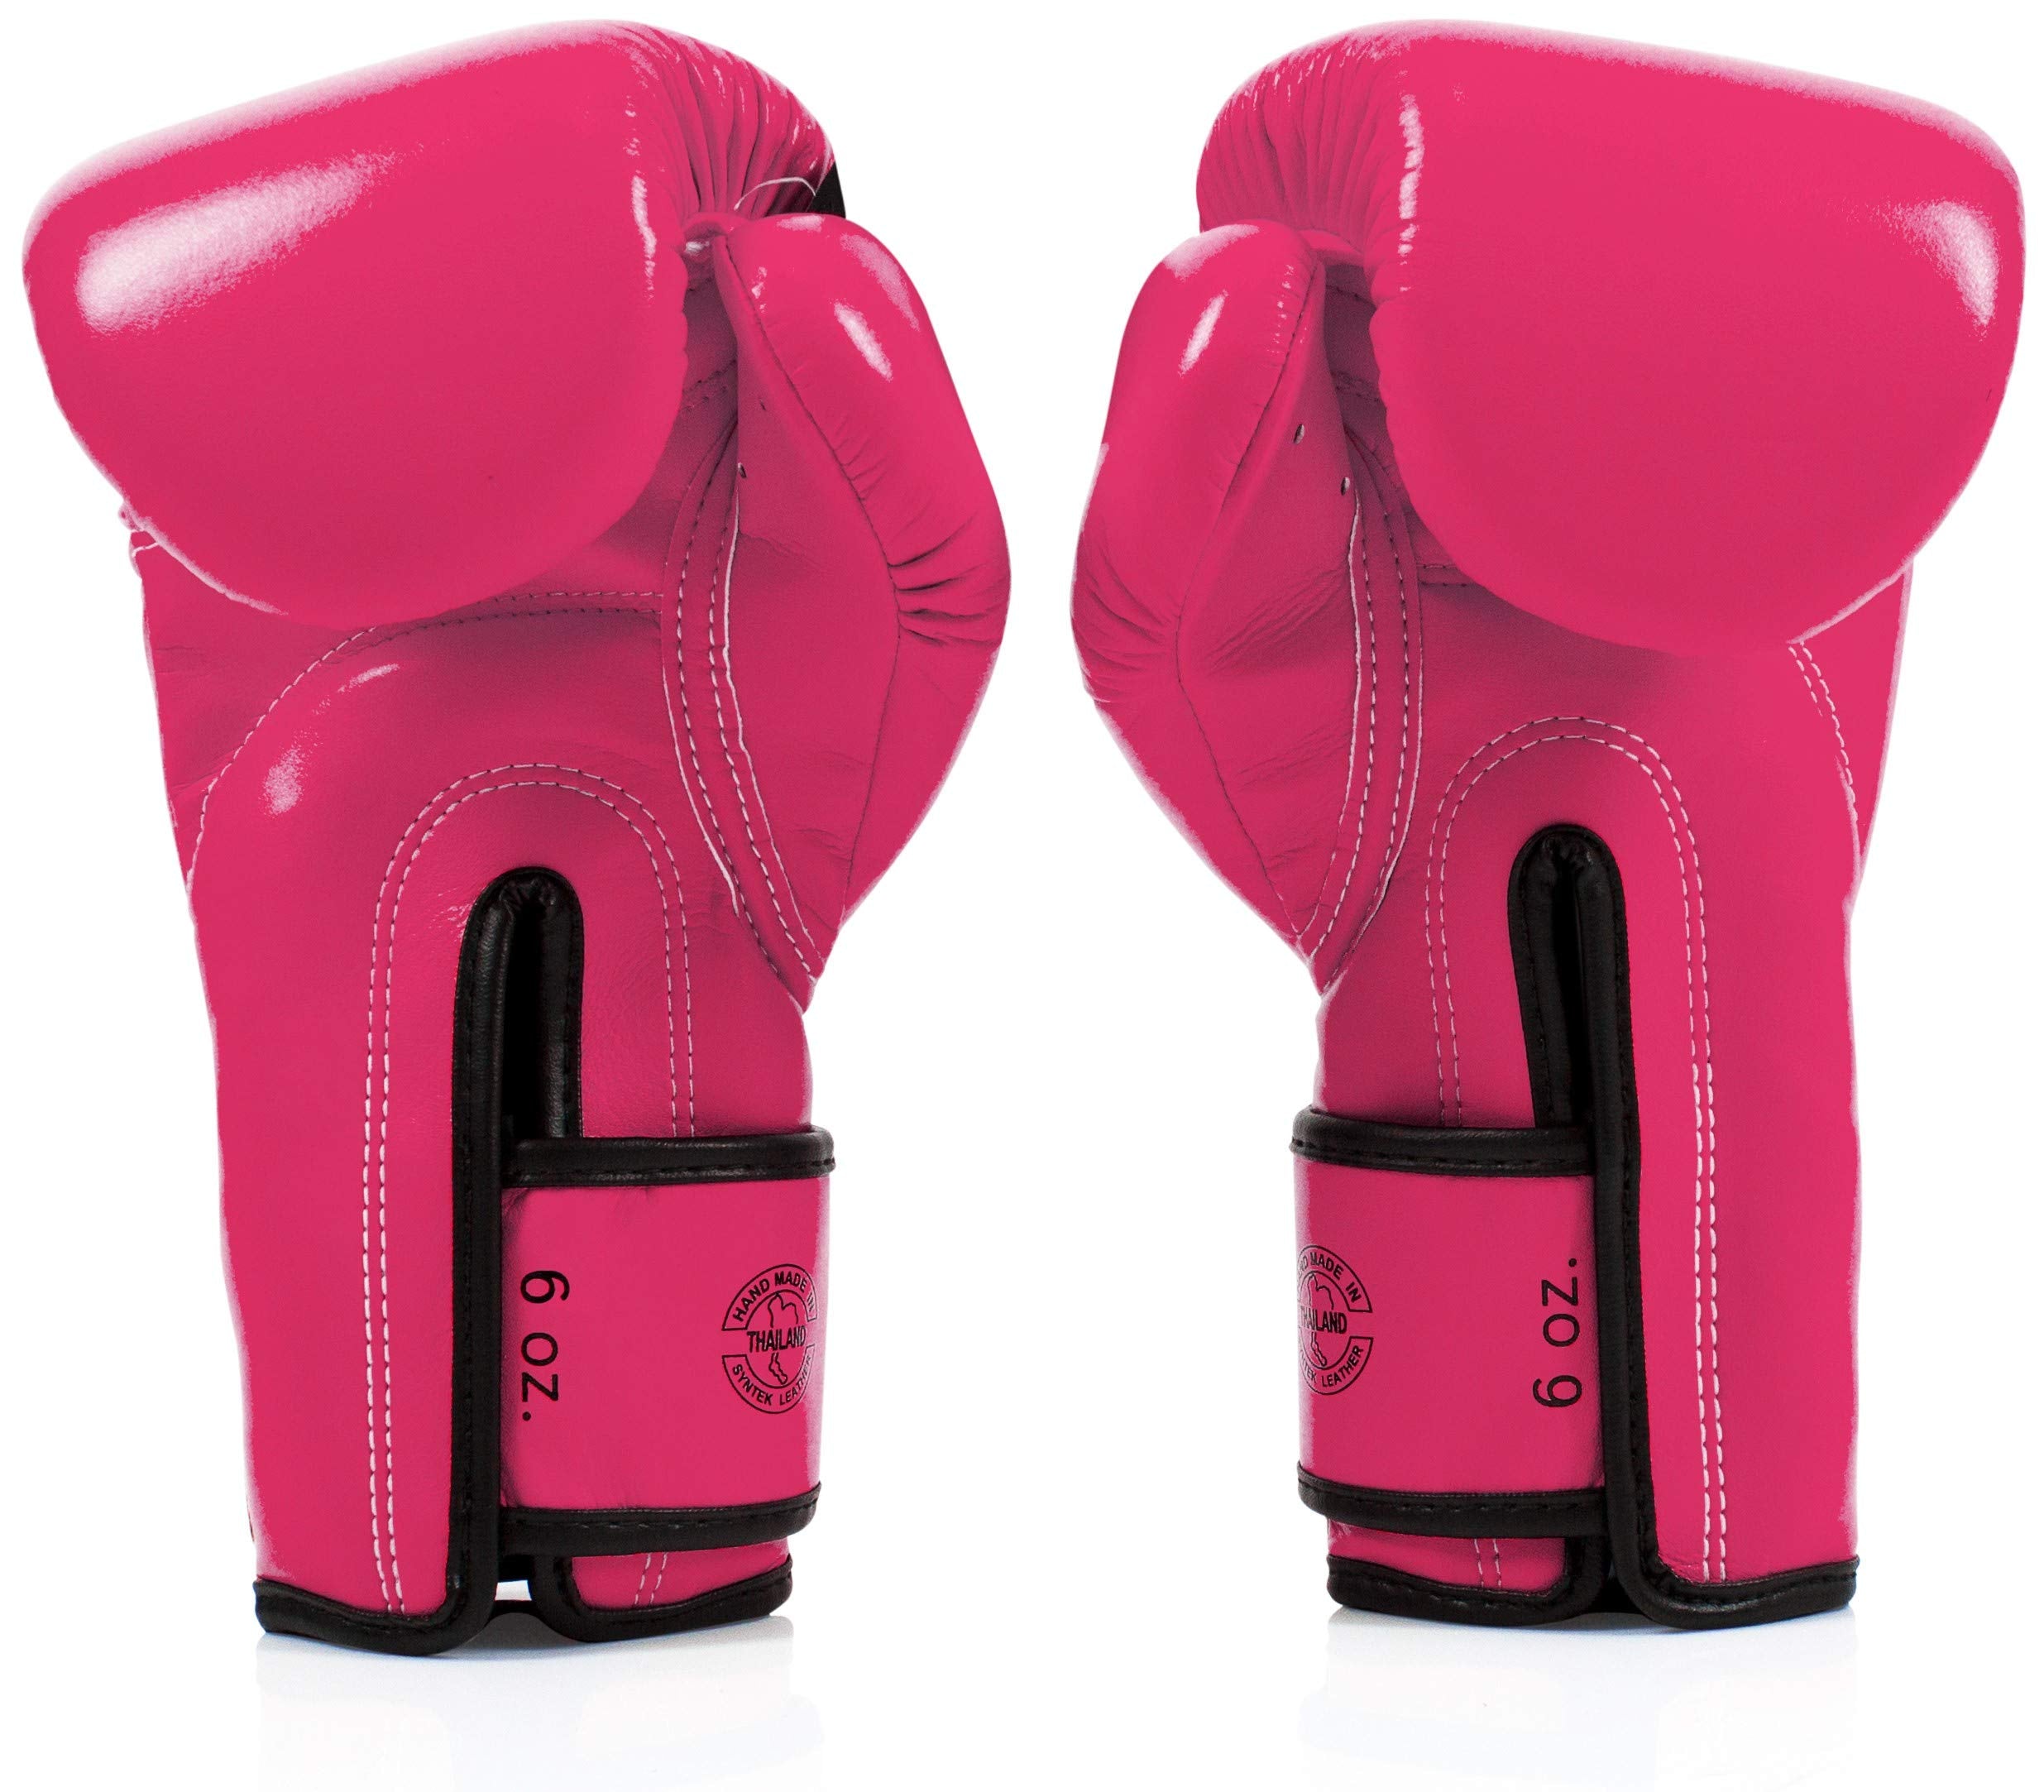 Pink Boxing Gloves - The Paleo Network